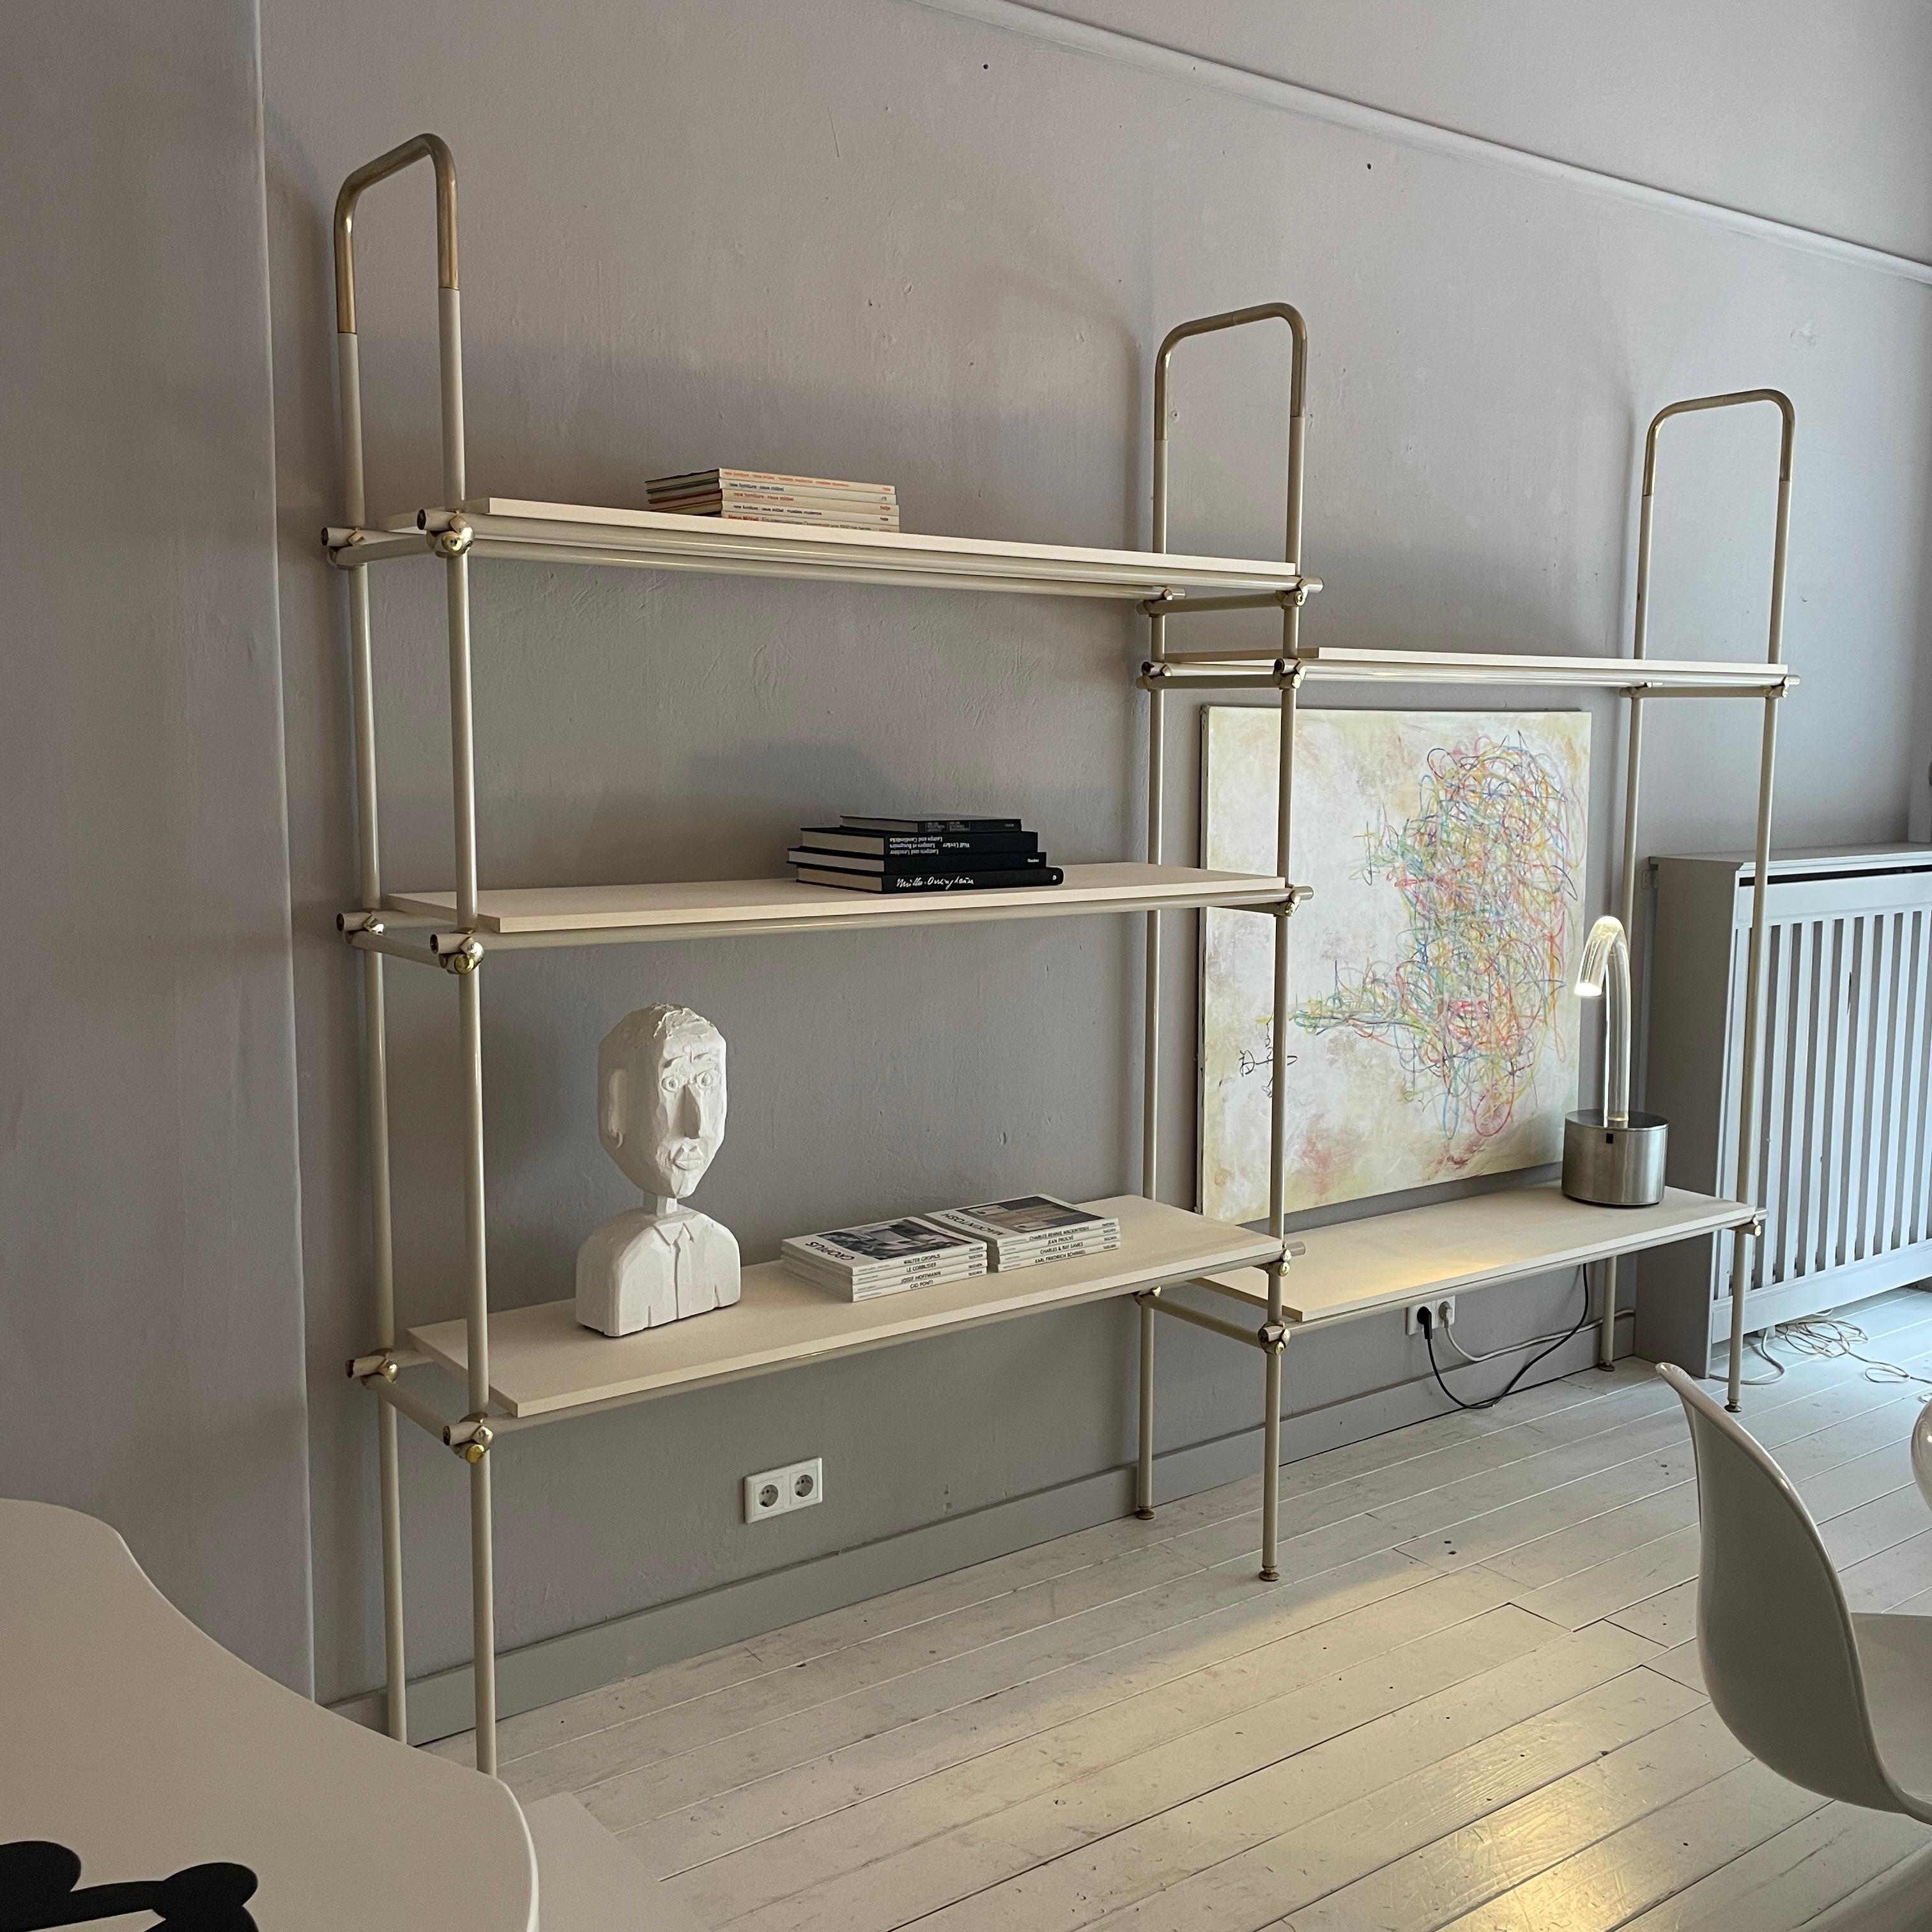 This beautiful Large Mid-Century Italian Metal and Brass Shelf / Shelving System, was made around 1970.
The base is made out of an off white lacquered metal and brass. the shelf boards are veneered in maple.
A unique piece which is a great